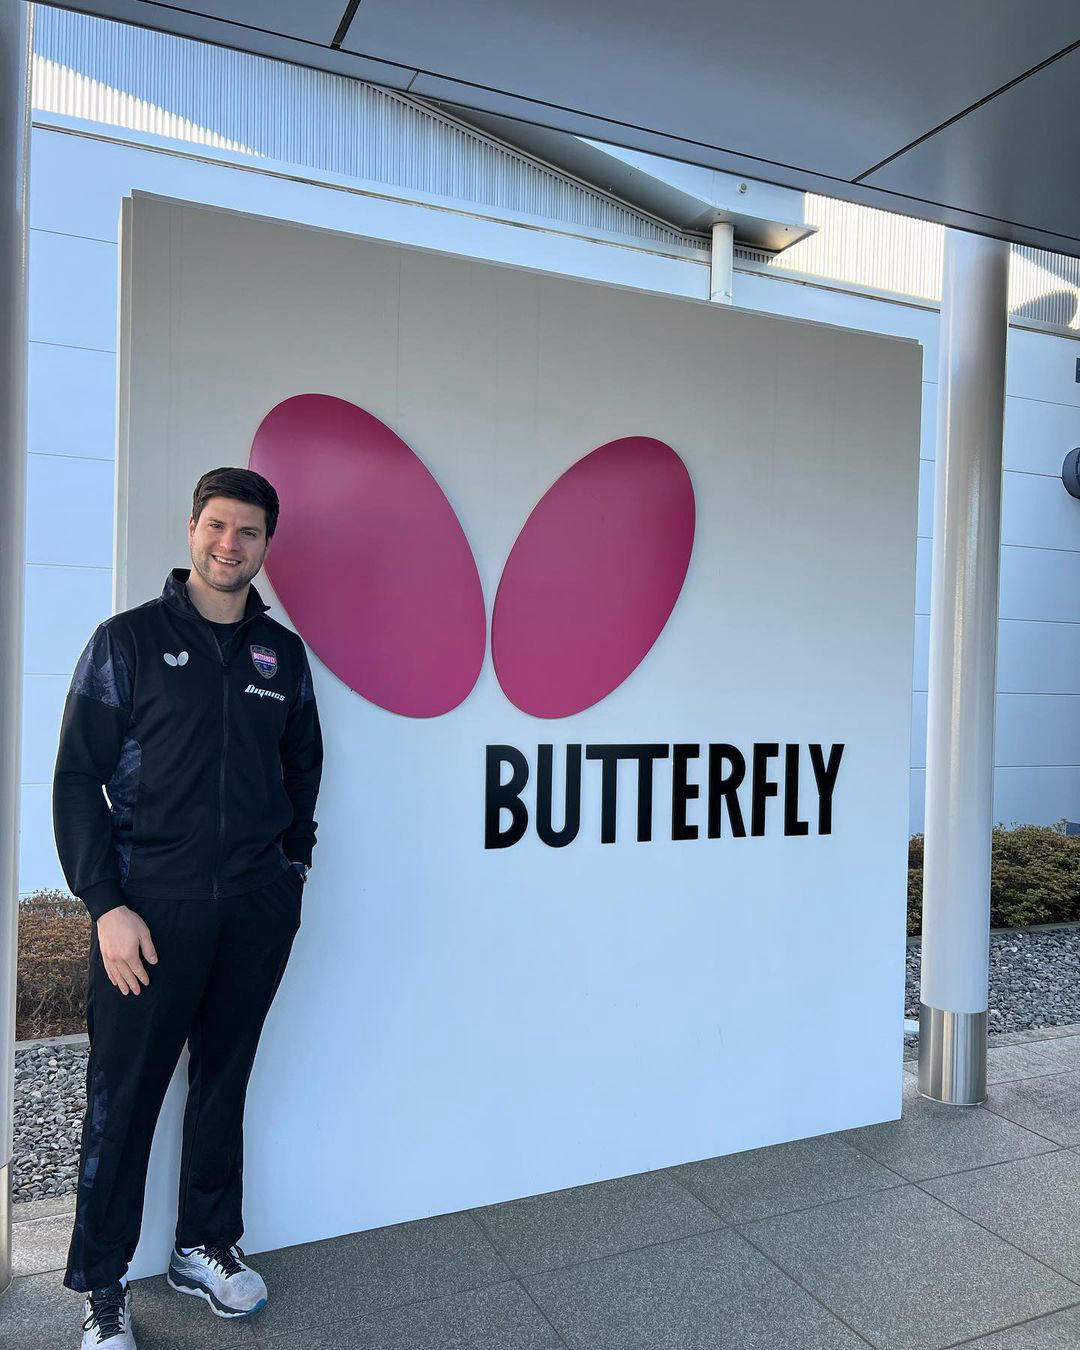 Thanks for such a warm welcome at the #butterflyttofficial headquarters and factory in Tokyo